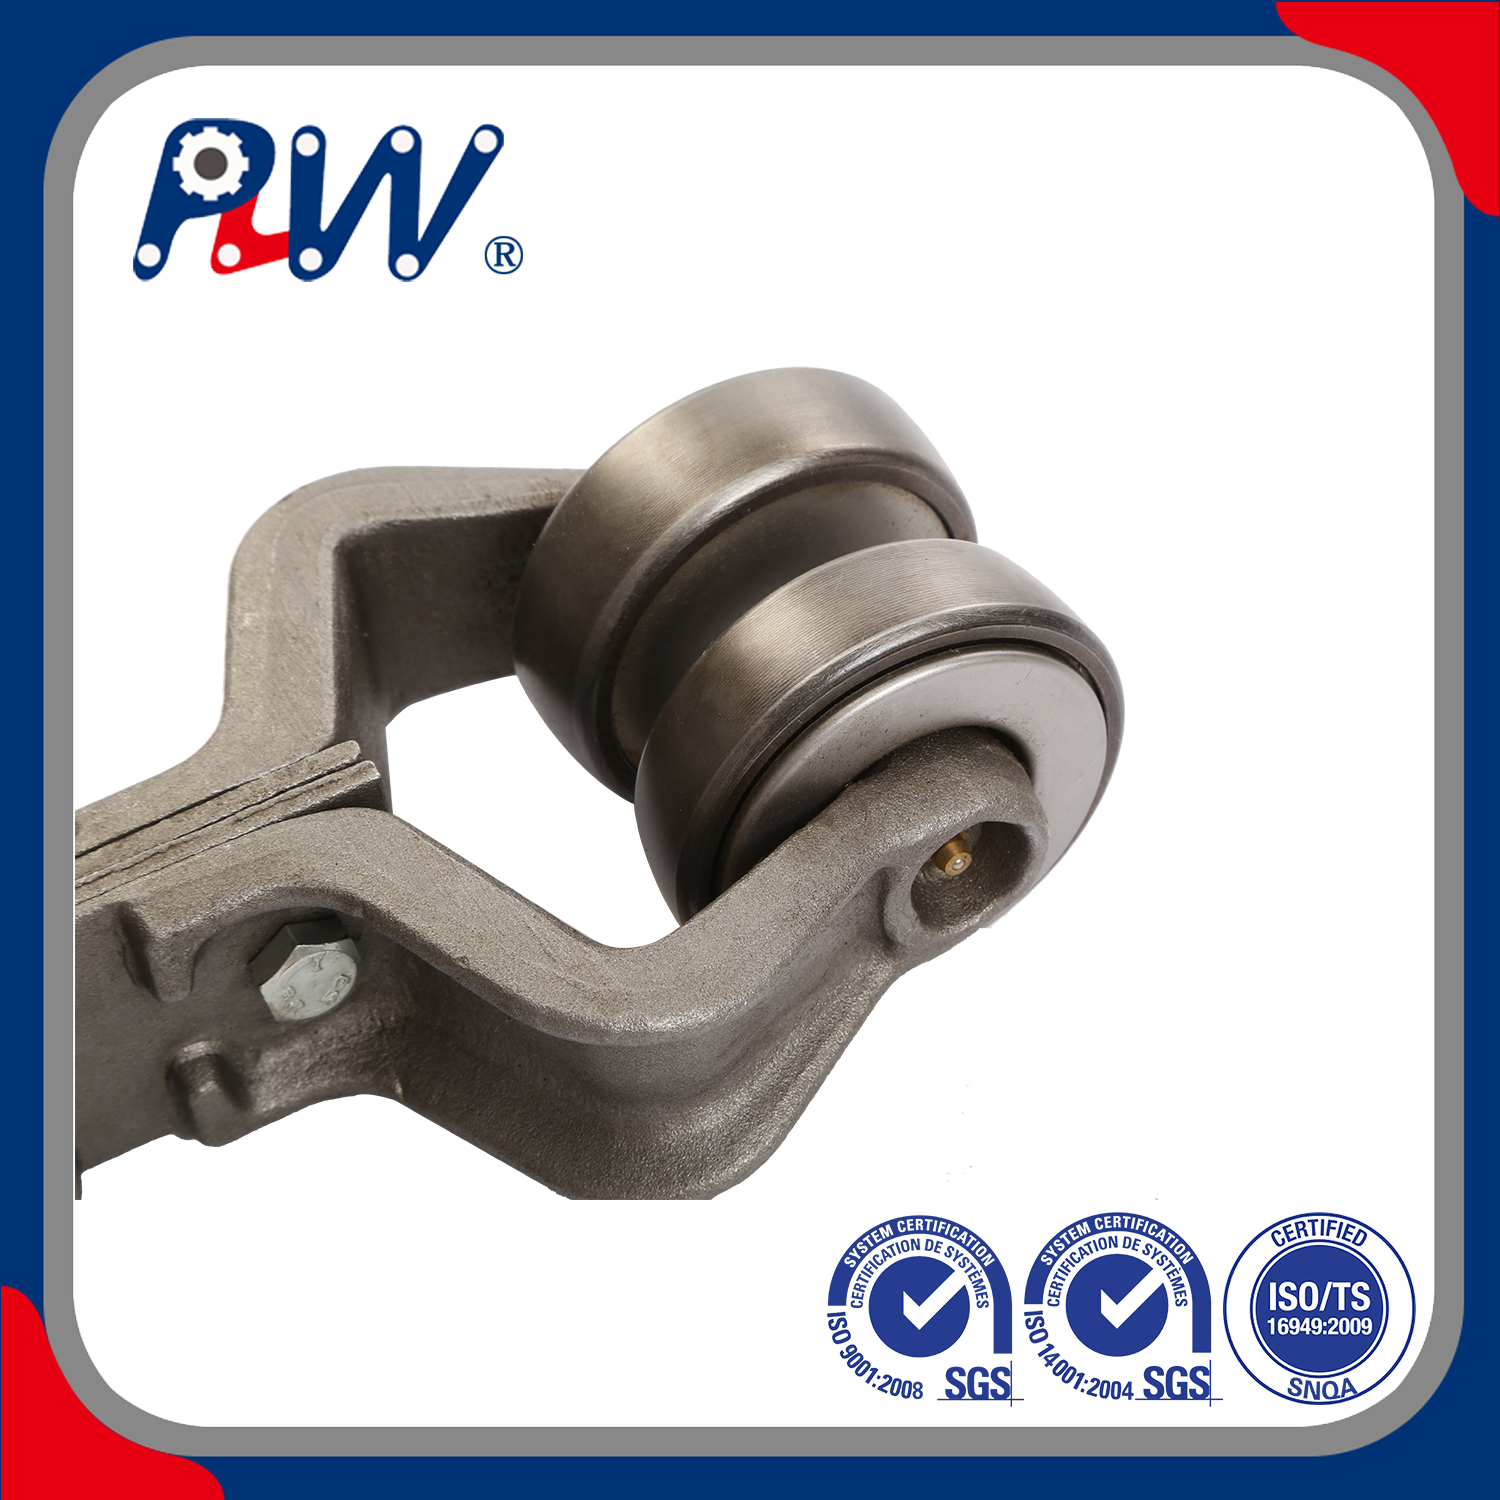 Drop Forged Link Rivetless Chains for Conveyor Machine on X348, X458, X678, X689